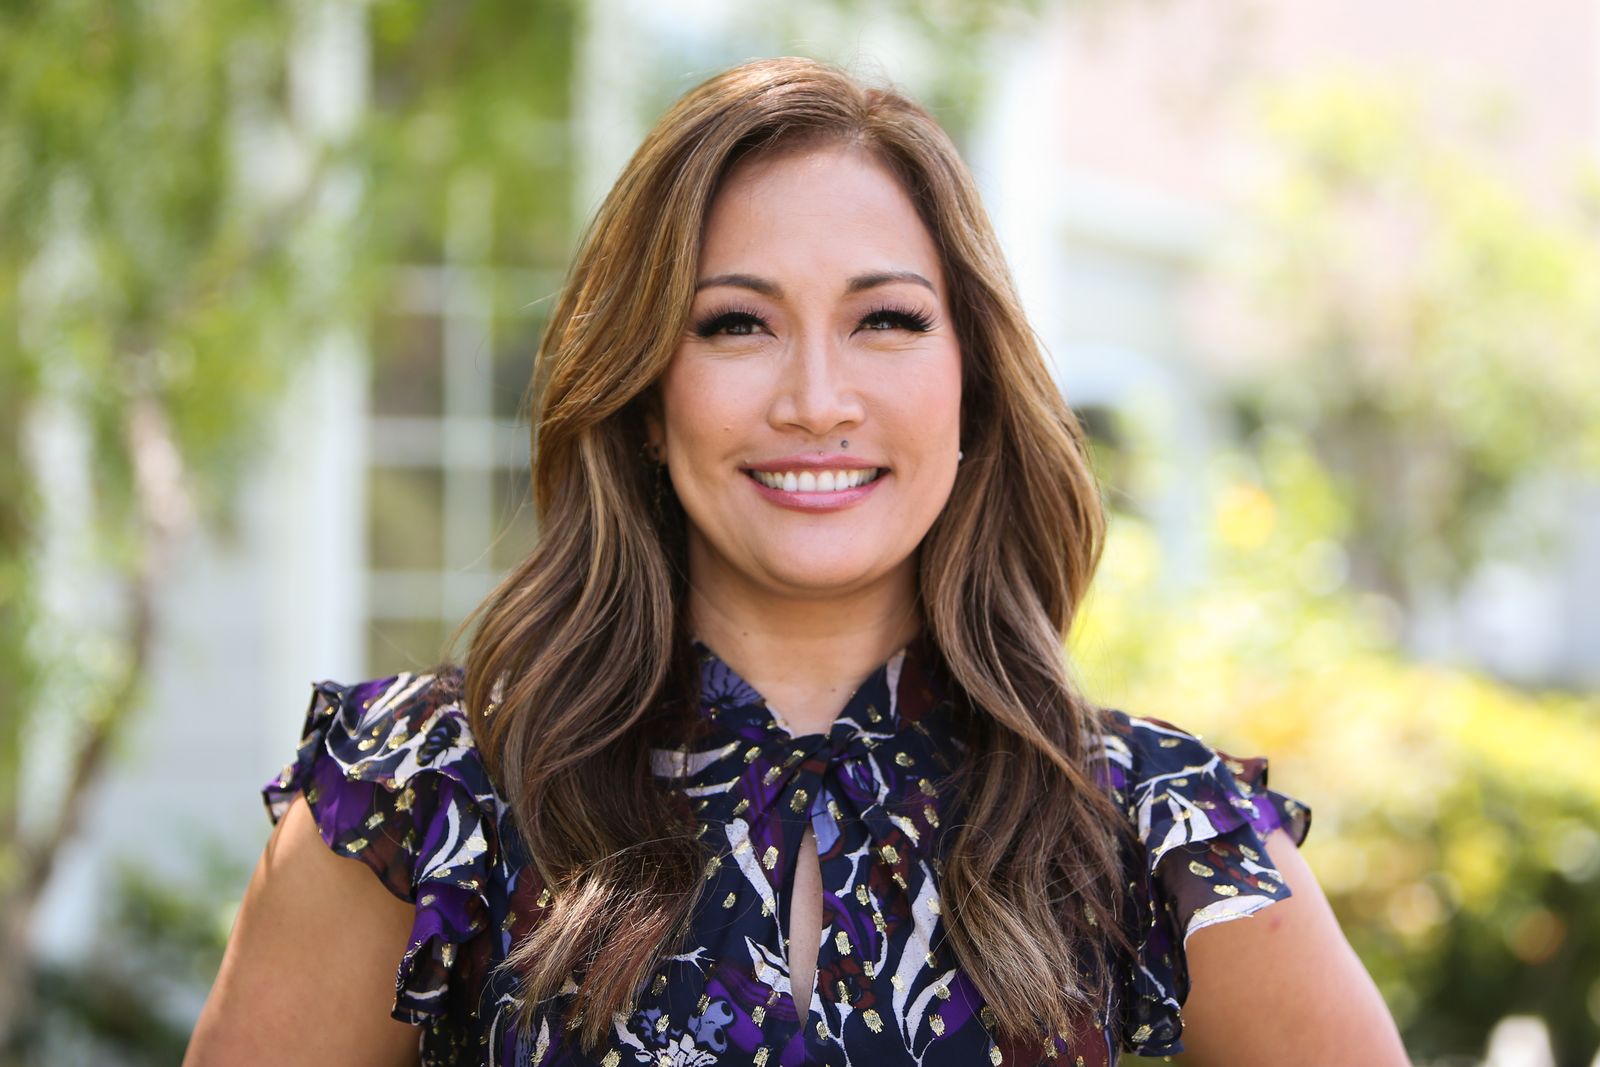 Carrie Ann Inaba visits Hallmark's "Home & Family" at Universal Studios Hollywood on May 3, 2019 | Photo: Getty Images